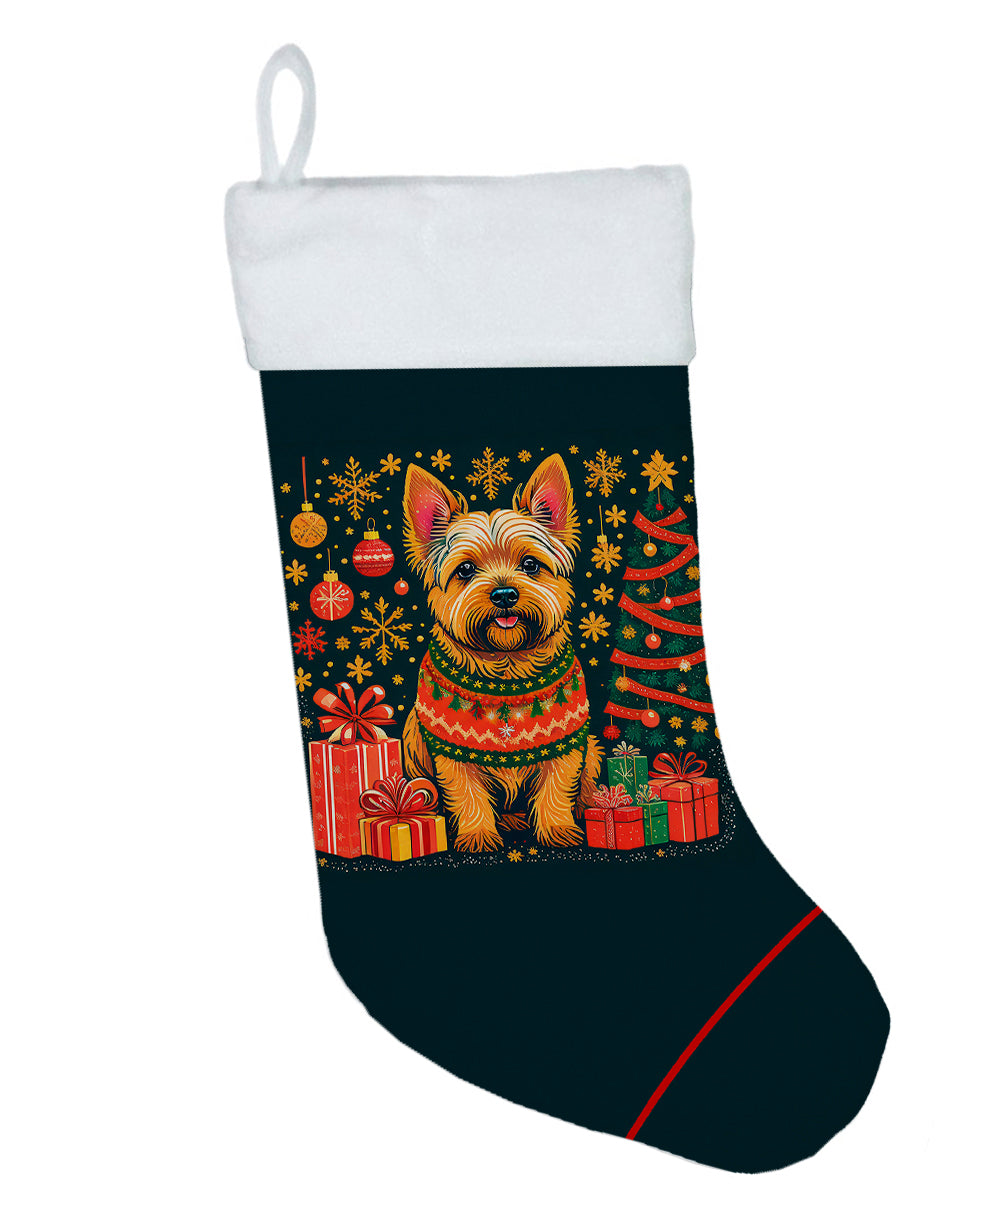 Buy this Norwich Terrier Christmas Christmas Stocking